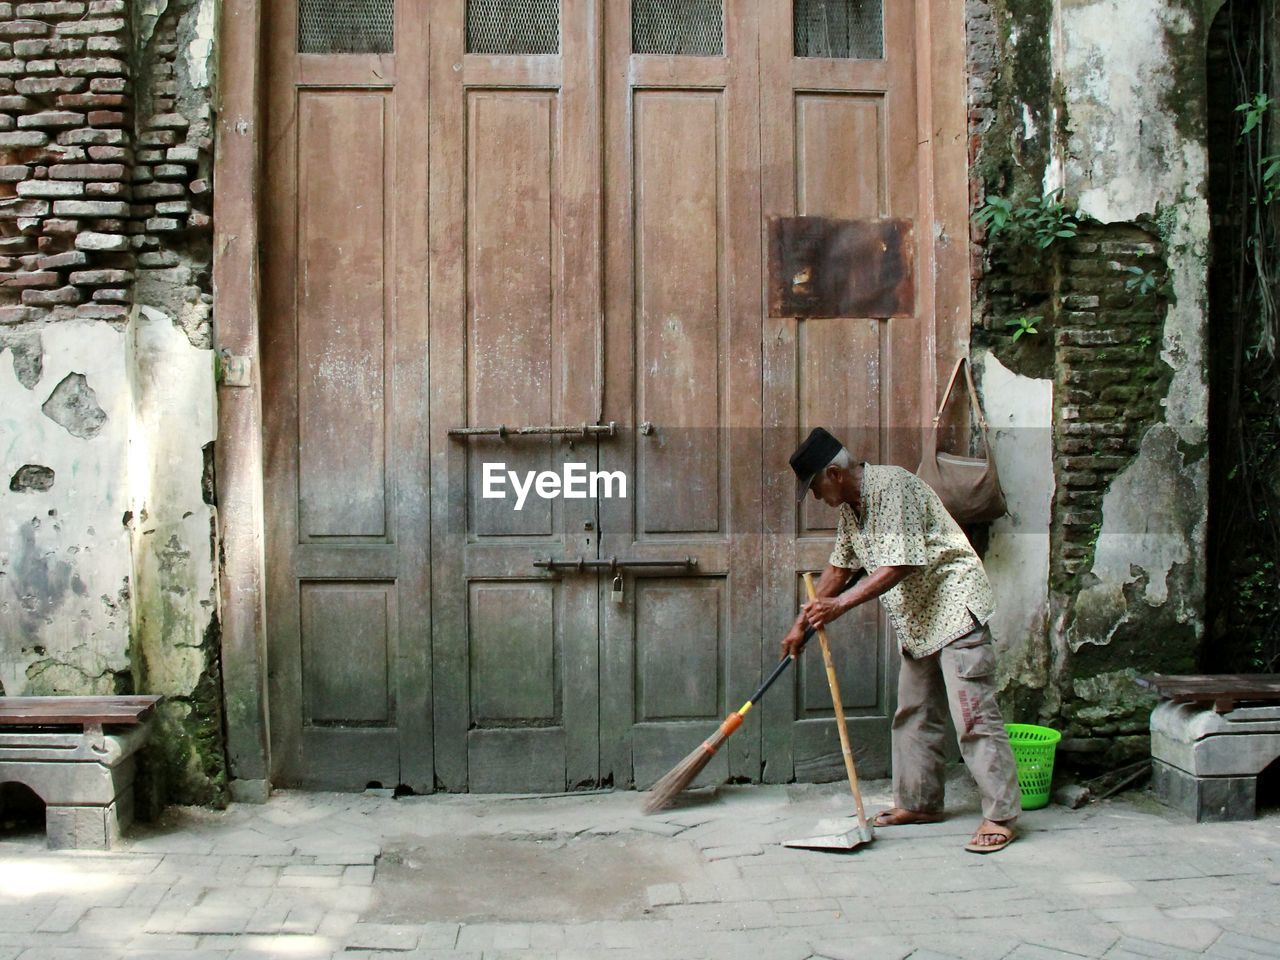 Man sweeping while standing against entrance of building